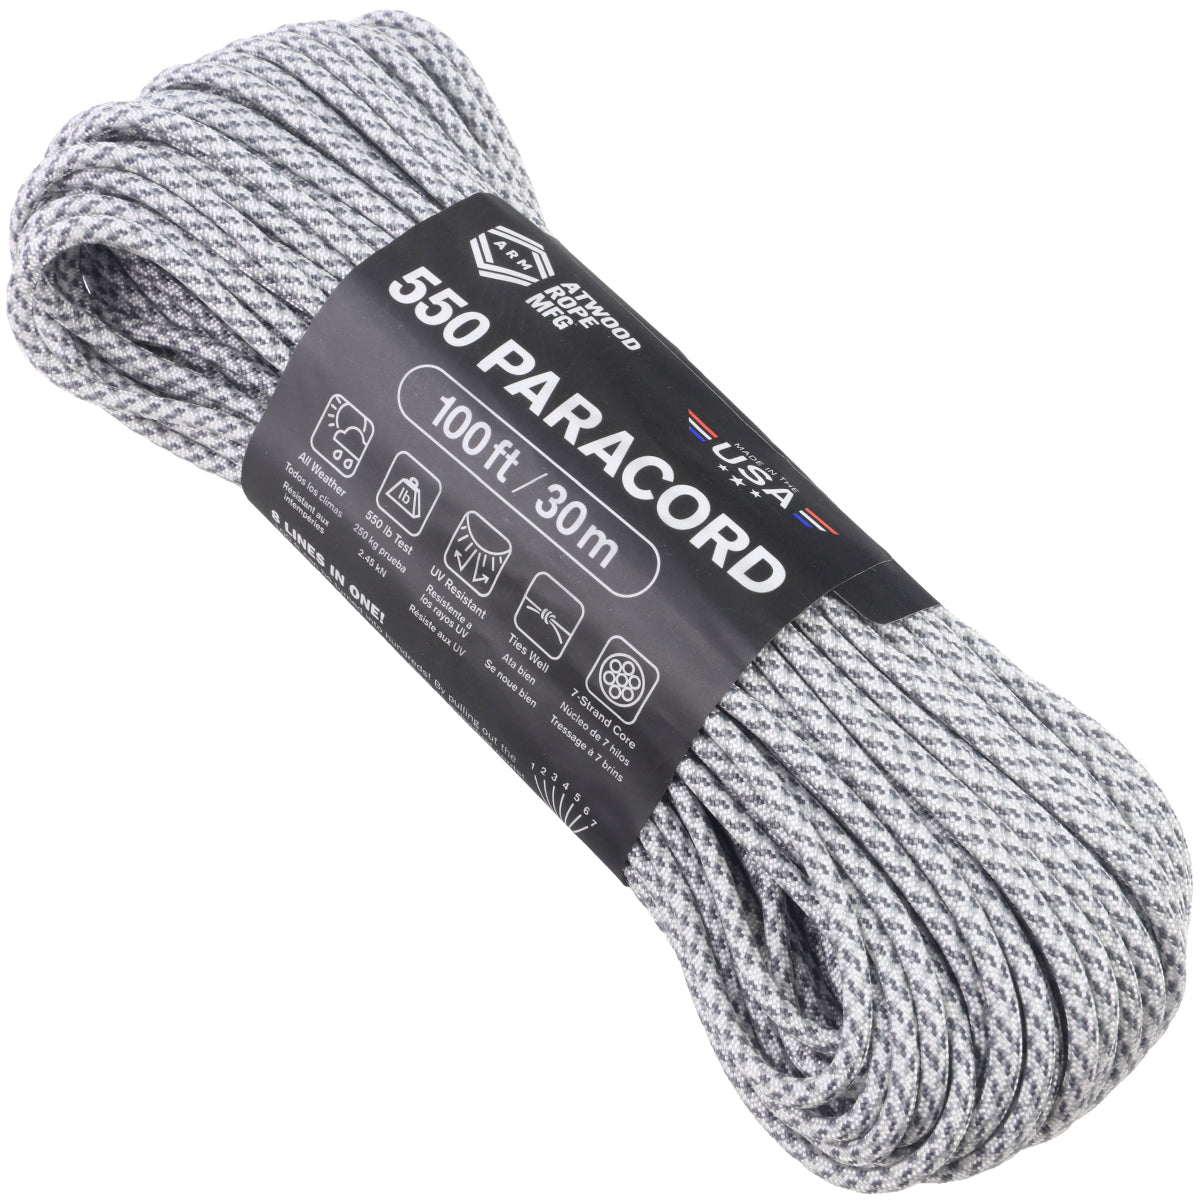 550 Paracord - Arctic Camo – Atwood Rope MFG